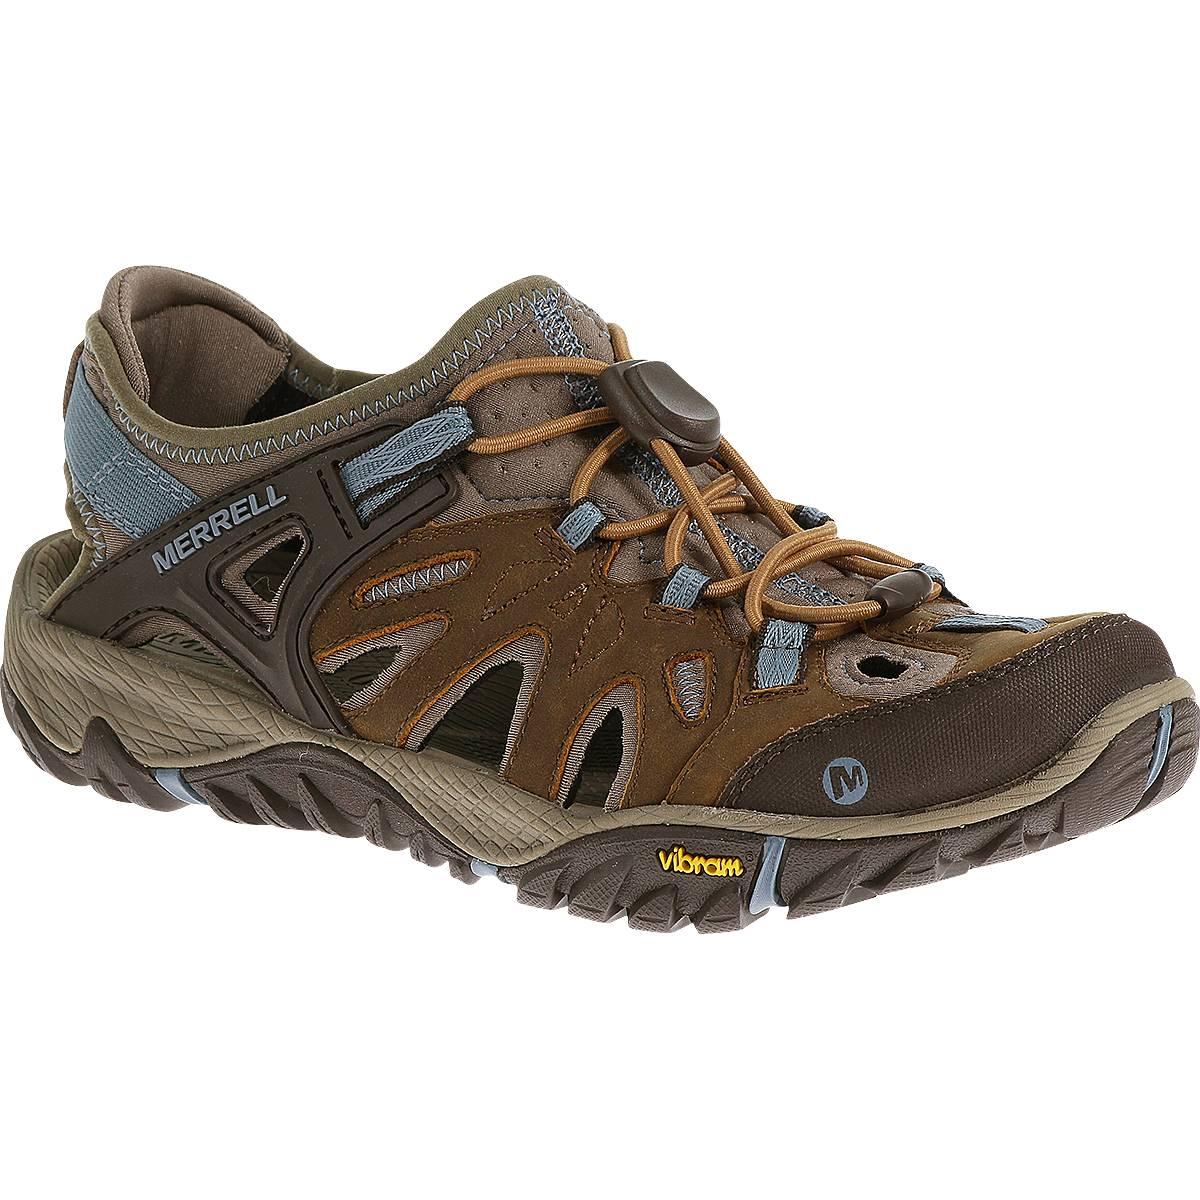 Merrell All Out Blaze Sieve Water Shoes 